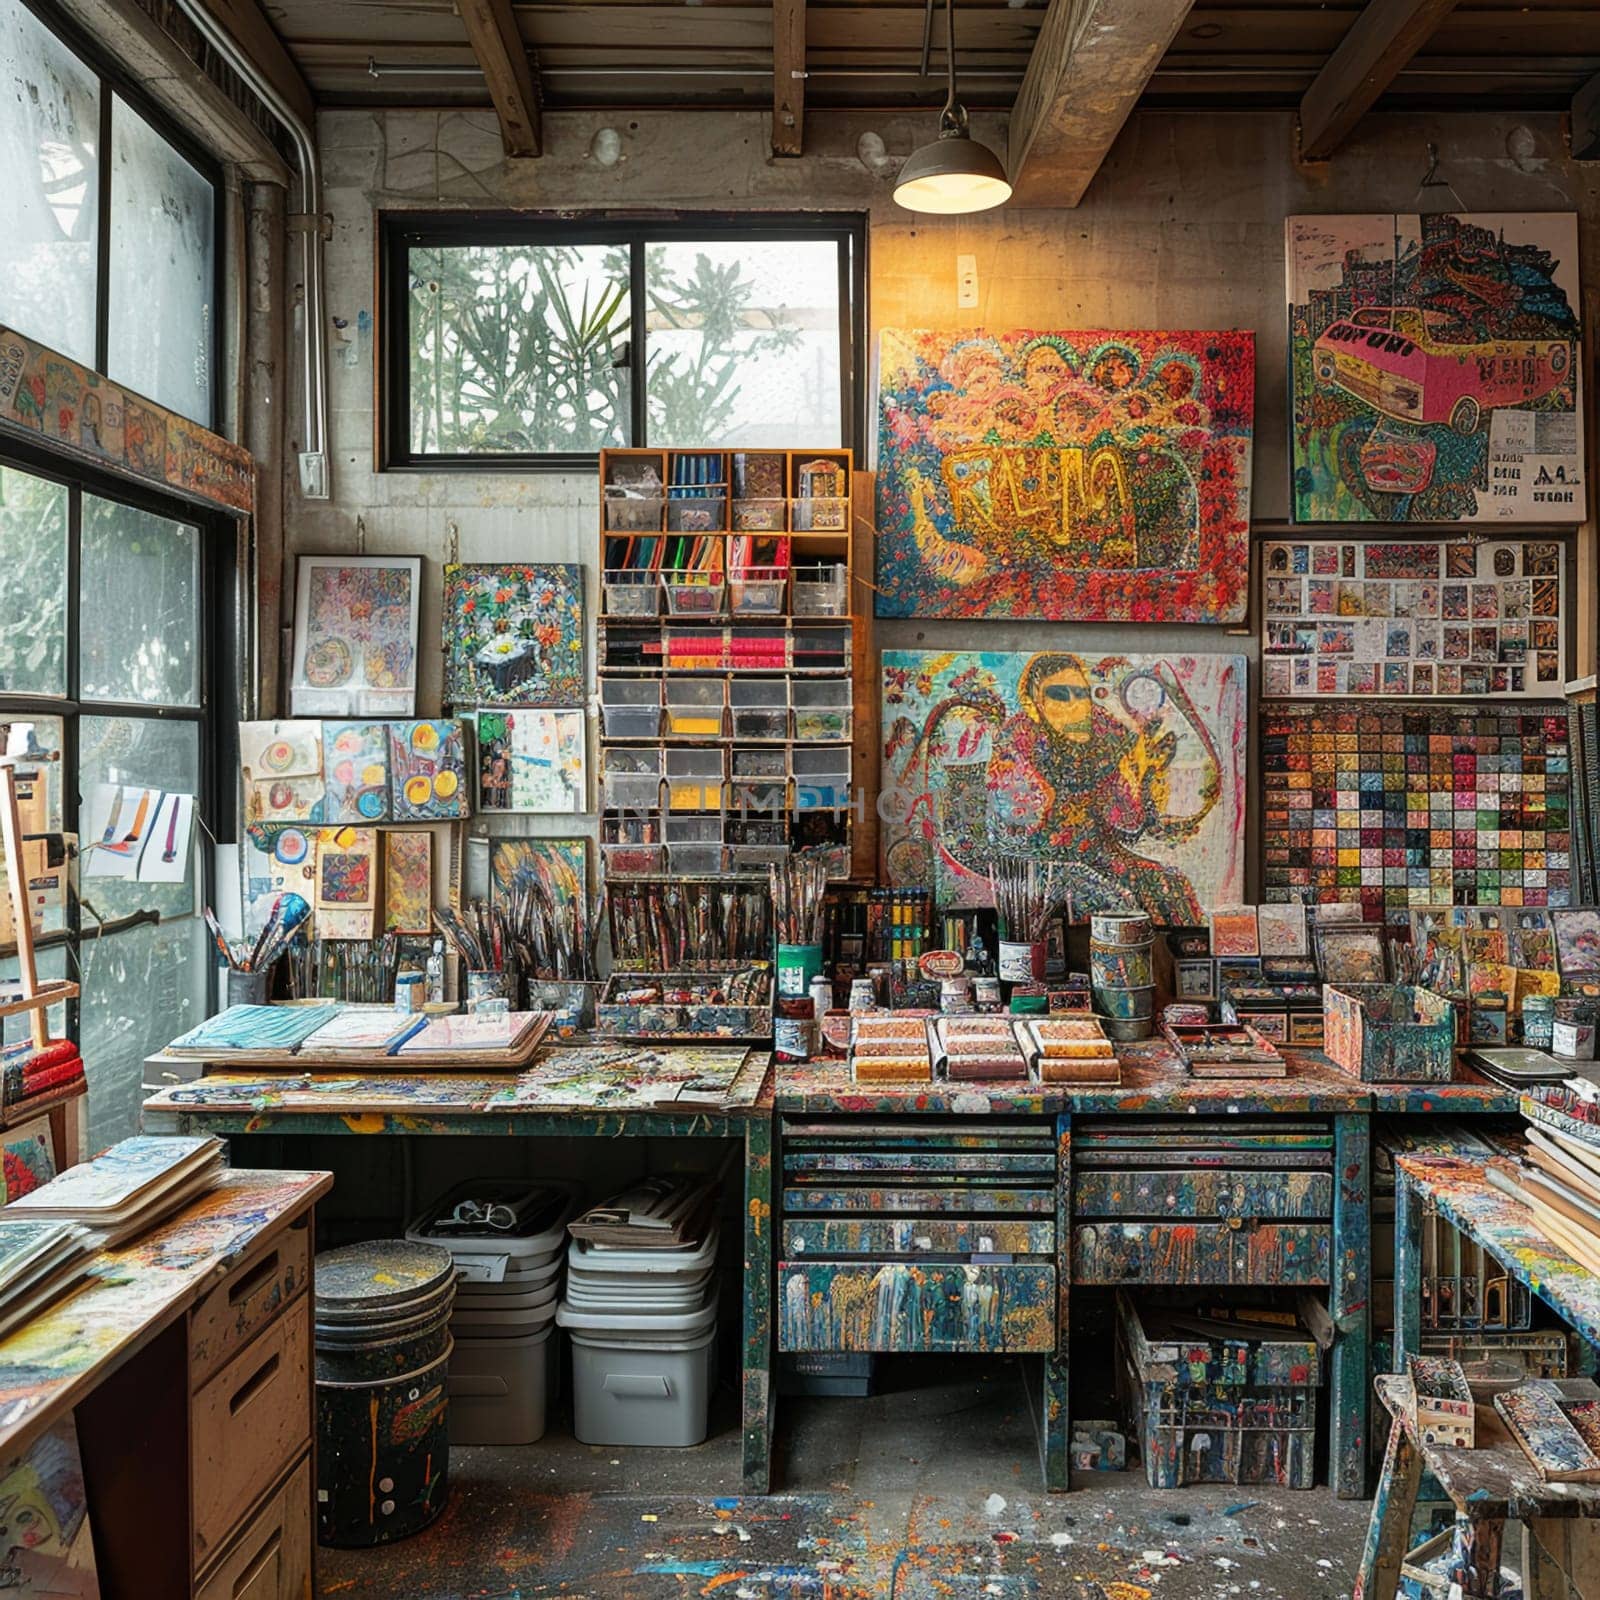 Eclectic artists studio with vibrant artwork and a variety of materialsup32K HD by Benzoix